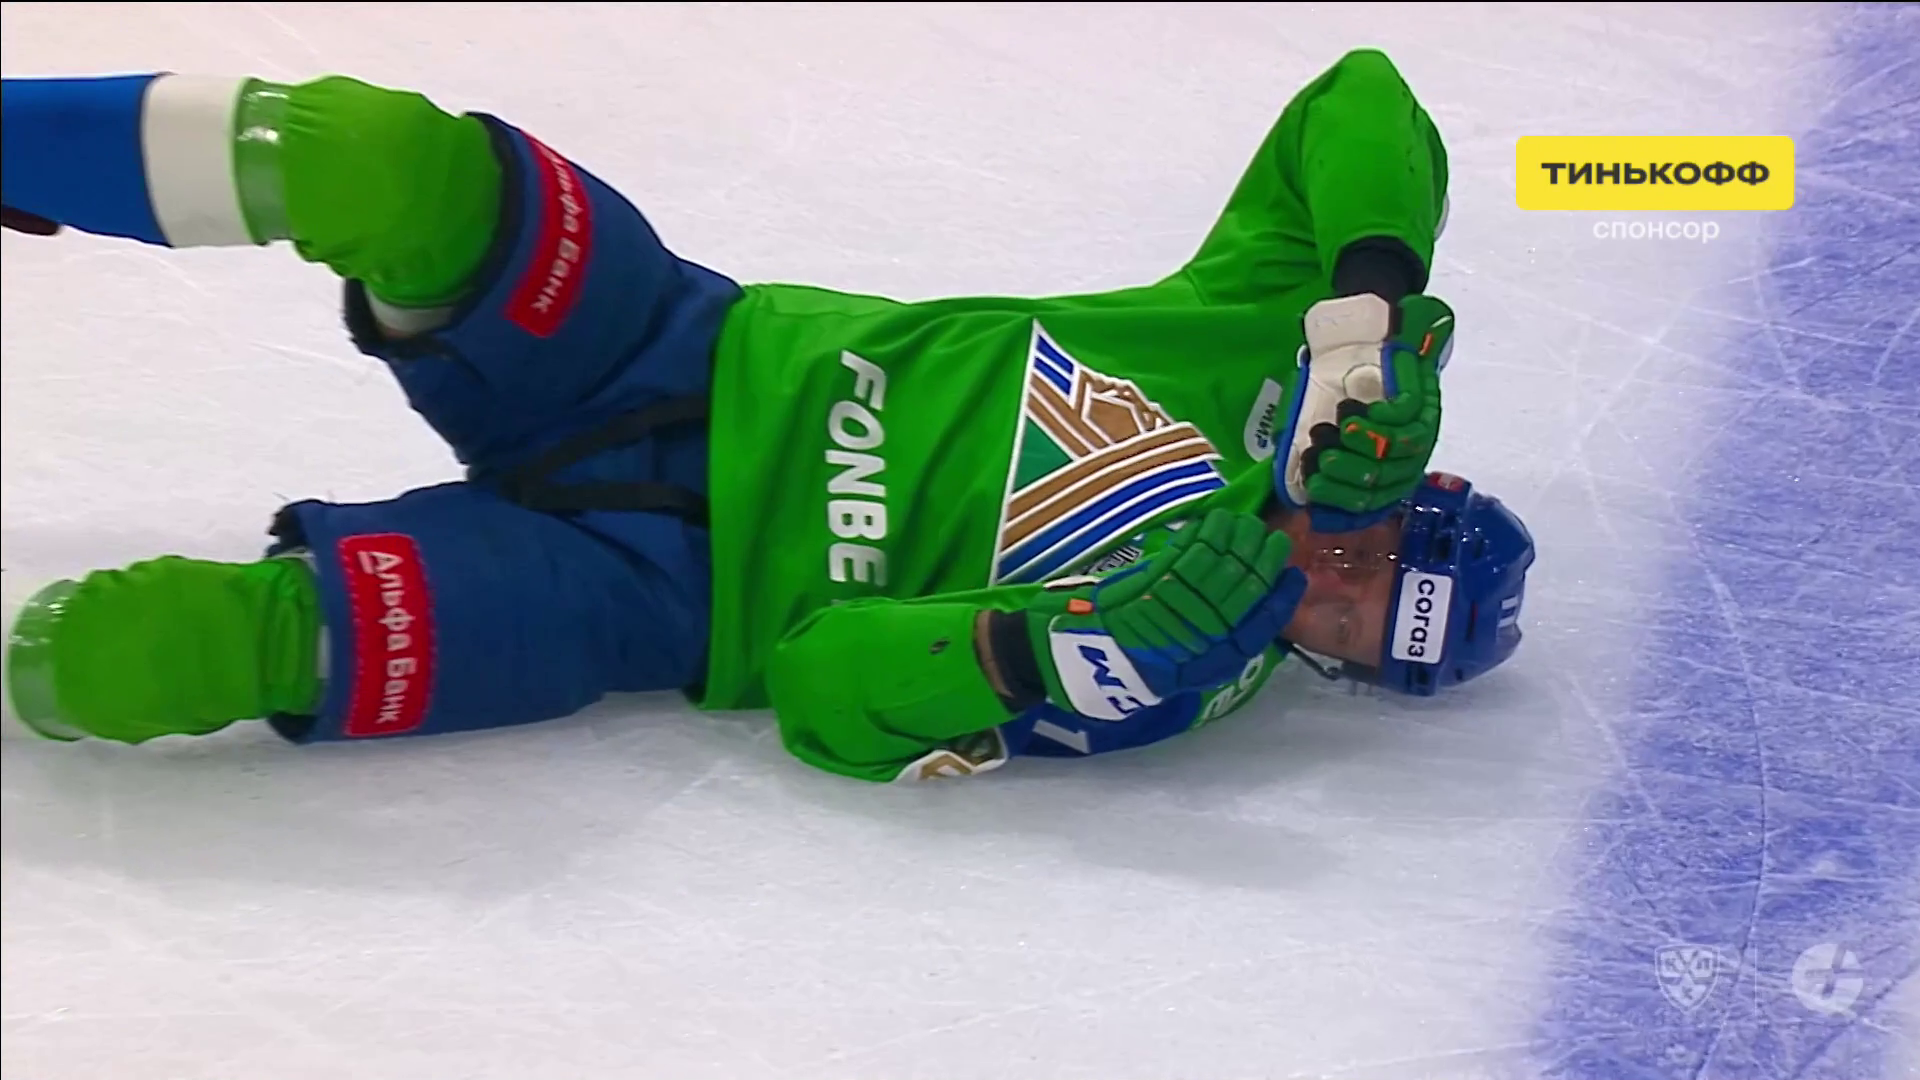 An American hockey player brutally knocked out the Russian champion with his first punch